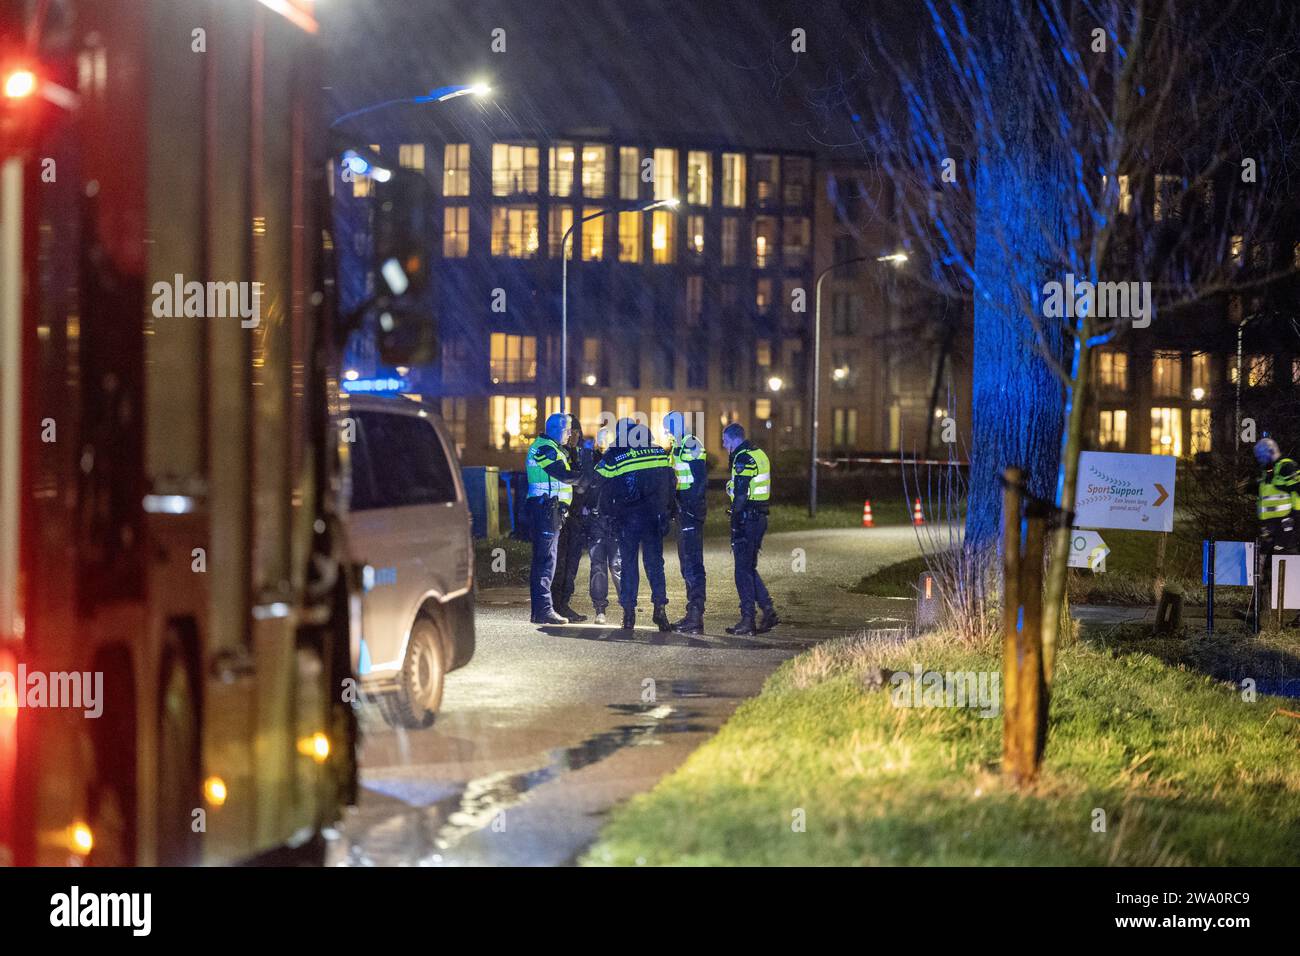 Haarlem - One person was killed in a fireworks incident in Haarlem. The emergency services were called around half past eleven for resuscitation at the Henk van Turnhoutpad near the Noord Schalkwijkerweg. Unfortunately, the assistance was of no avail and the victim died from the injuries. netherlands out - belgium out Stock Photo